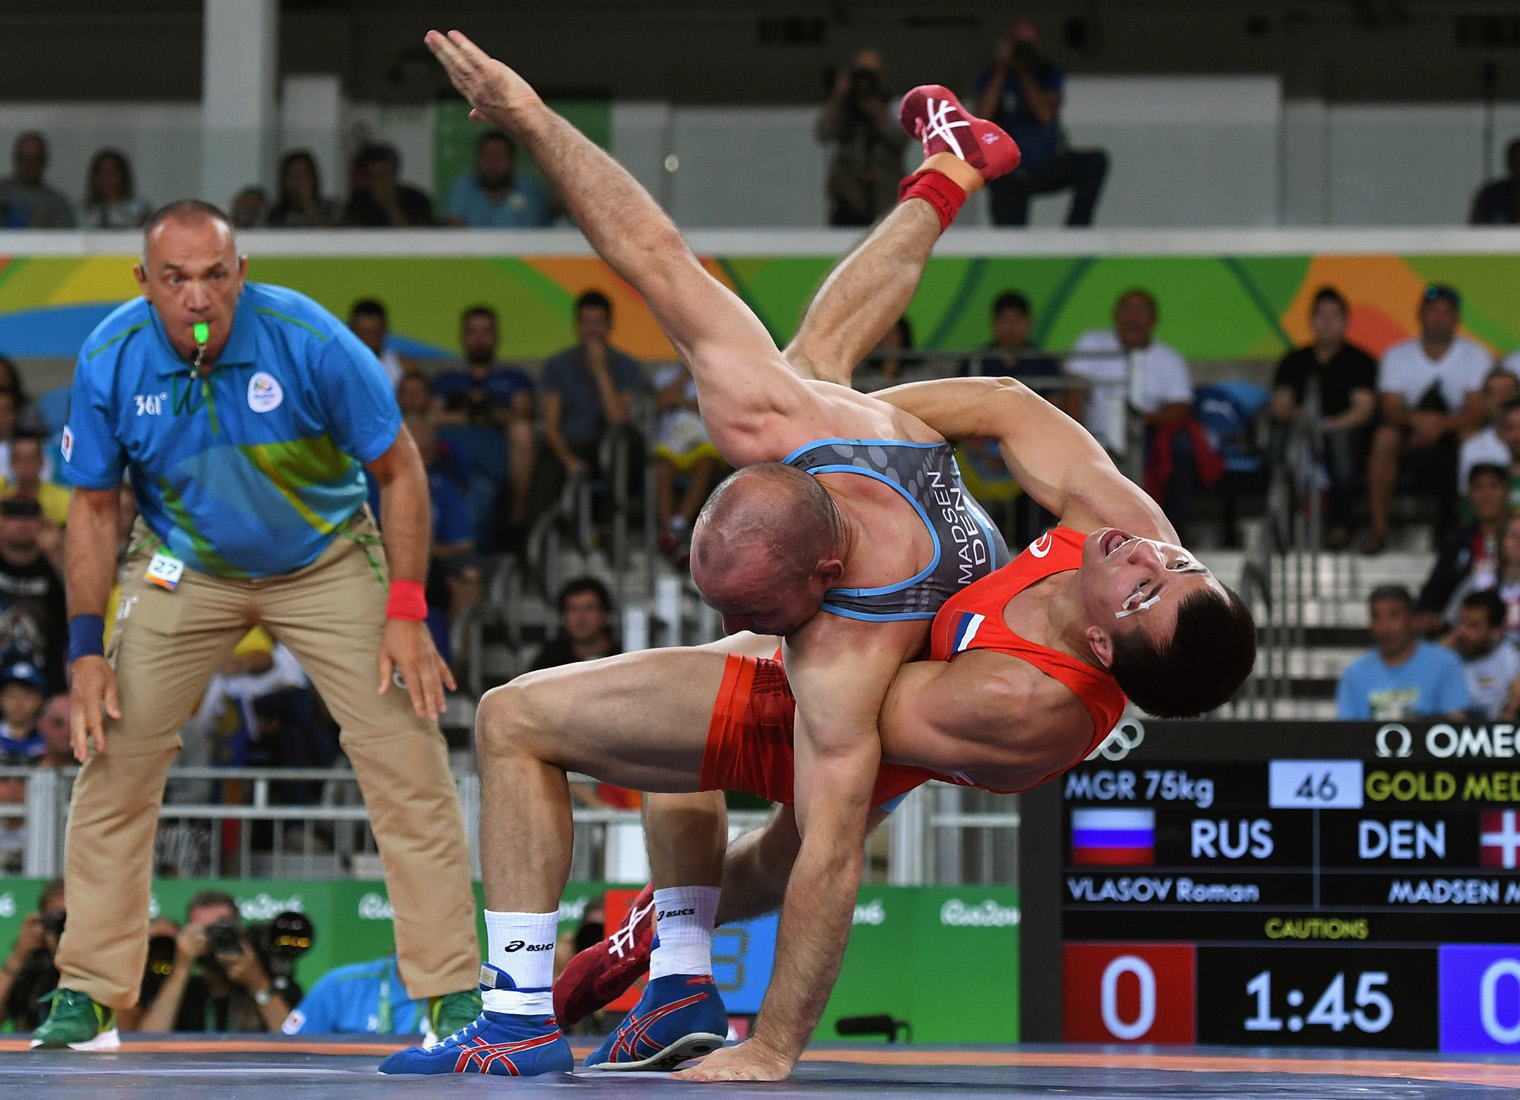 RIO DE JANEIRO, BRAZIL - AUGUST 14: Mark Overgaard Madsen of Denmark competes against Roman Vlasov of Russia during the Men's Greco-Roman 75 kg Gold Medal match on Day 9 of the Rio 2016 Olympic Games at Carioca Arena 2 on August 14, 2016 in Rio de Janeiro, Brazil. (Photo by David Ramos/Getty Images)